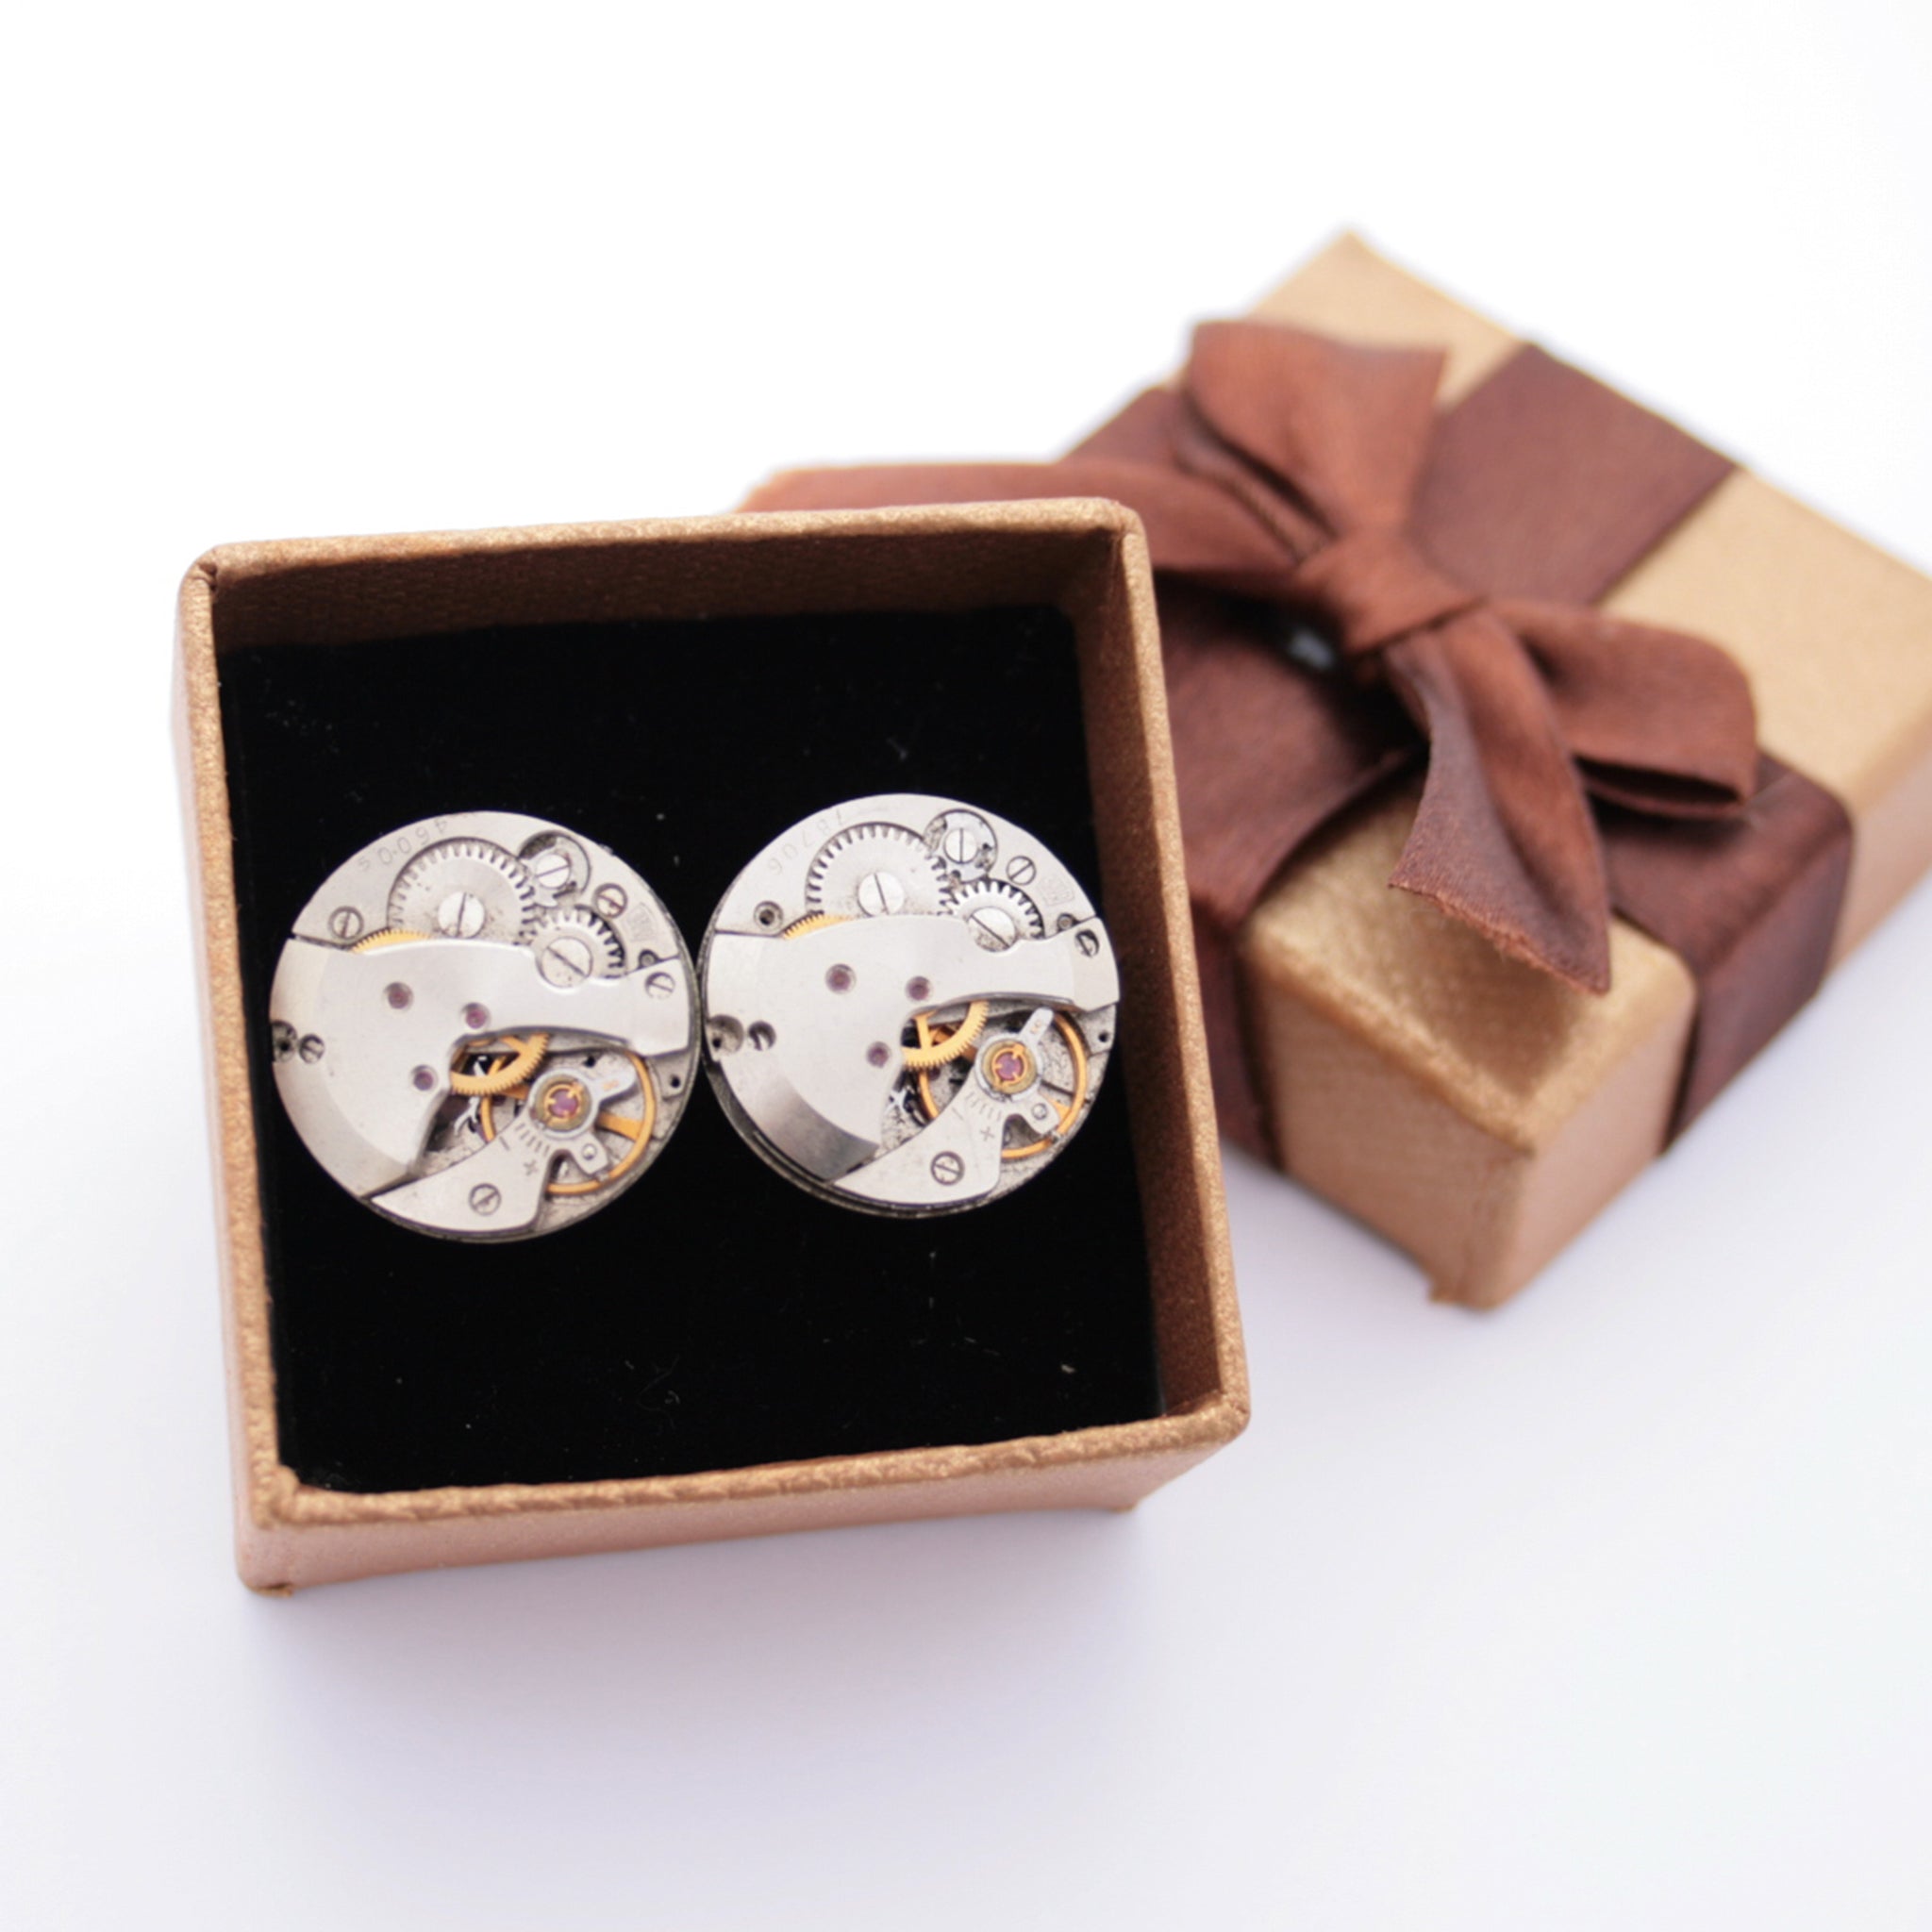 Novelty Watch Cufflinks made of real watches in a brown box with a bow